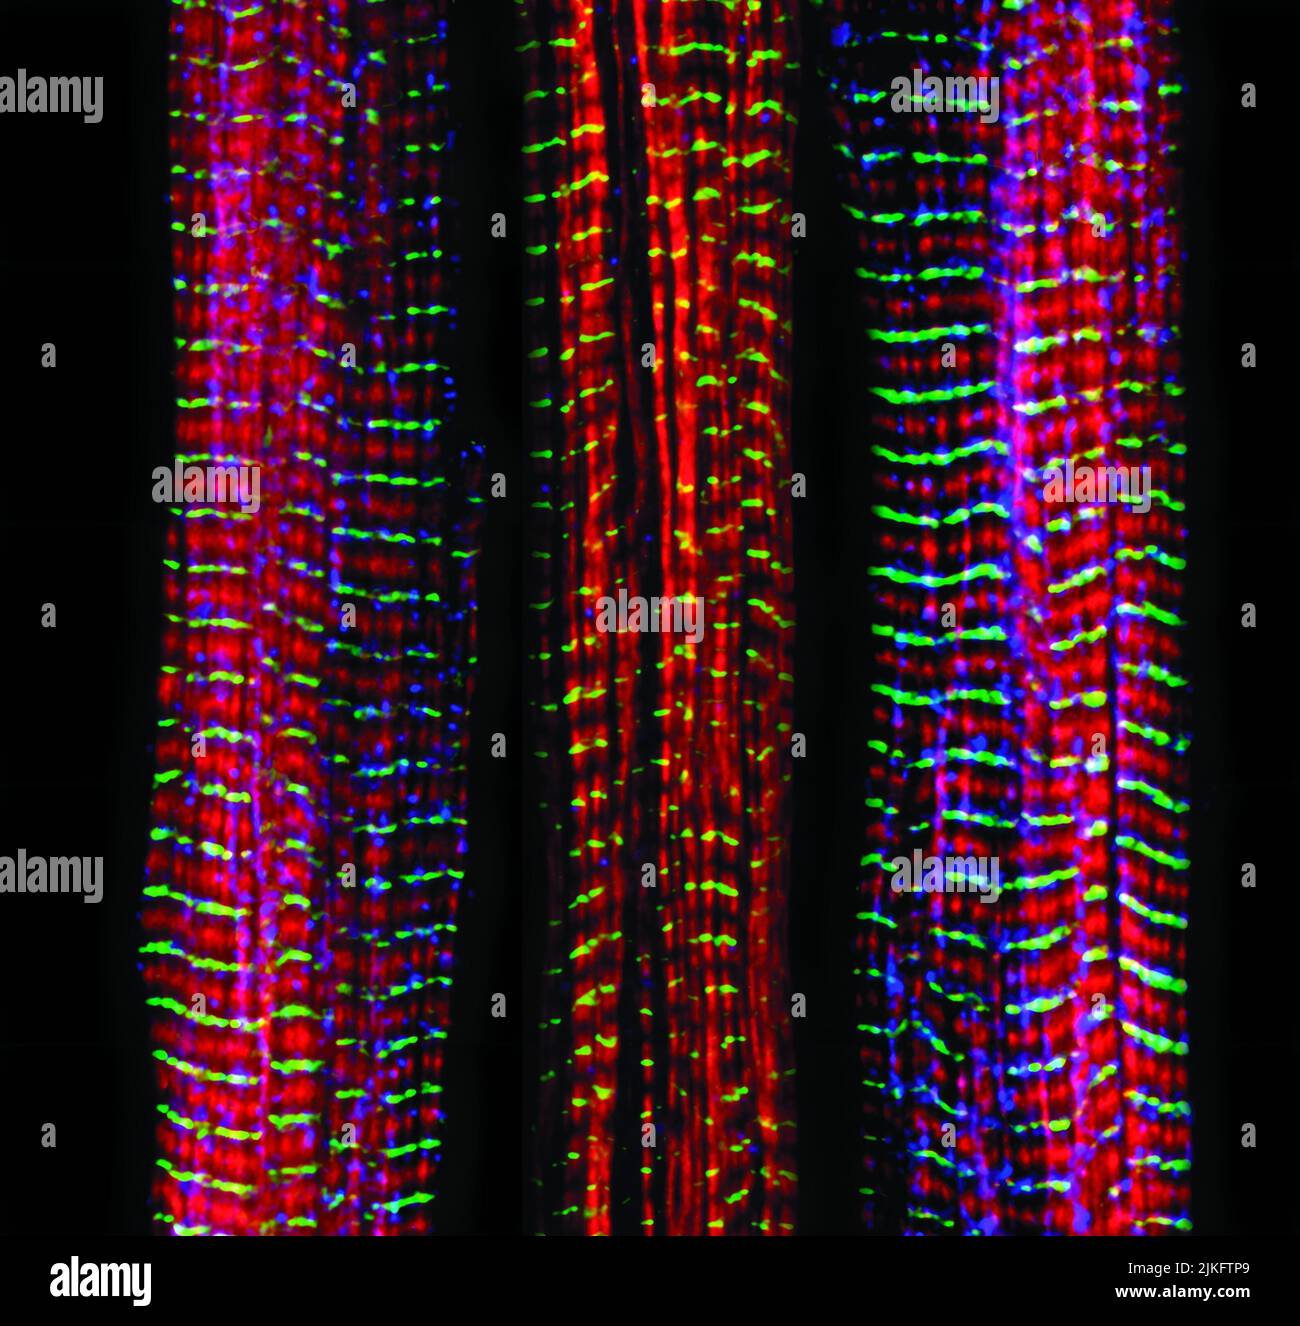 Of the three muscle fibers shown here, the one on the right and the one on the left are normal. The middle fiber is deficient a large protein called nebulin (blue). Nebulin plays a number of roles in the structure and function of muscles, and its absence is associated with certain neuromuscular disorders. Stock Photo